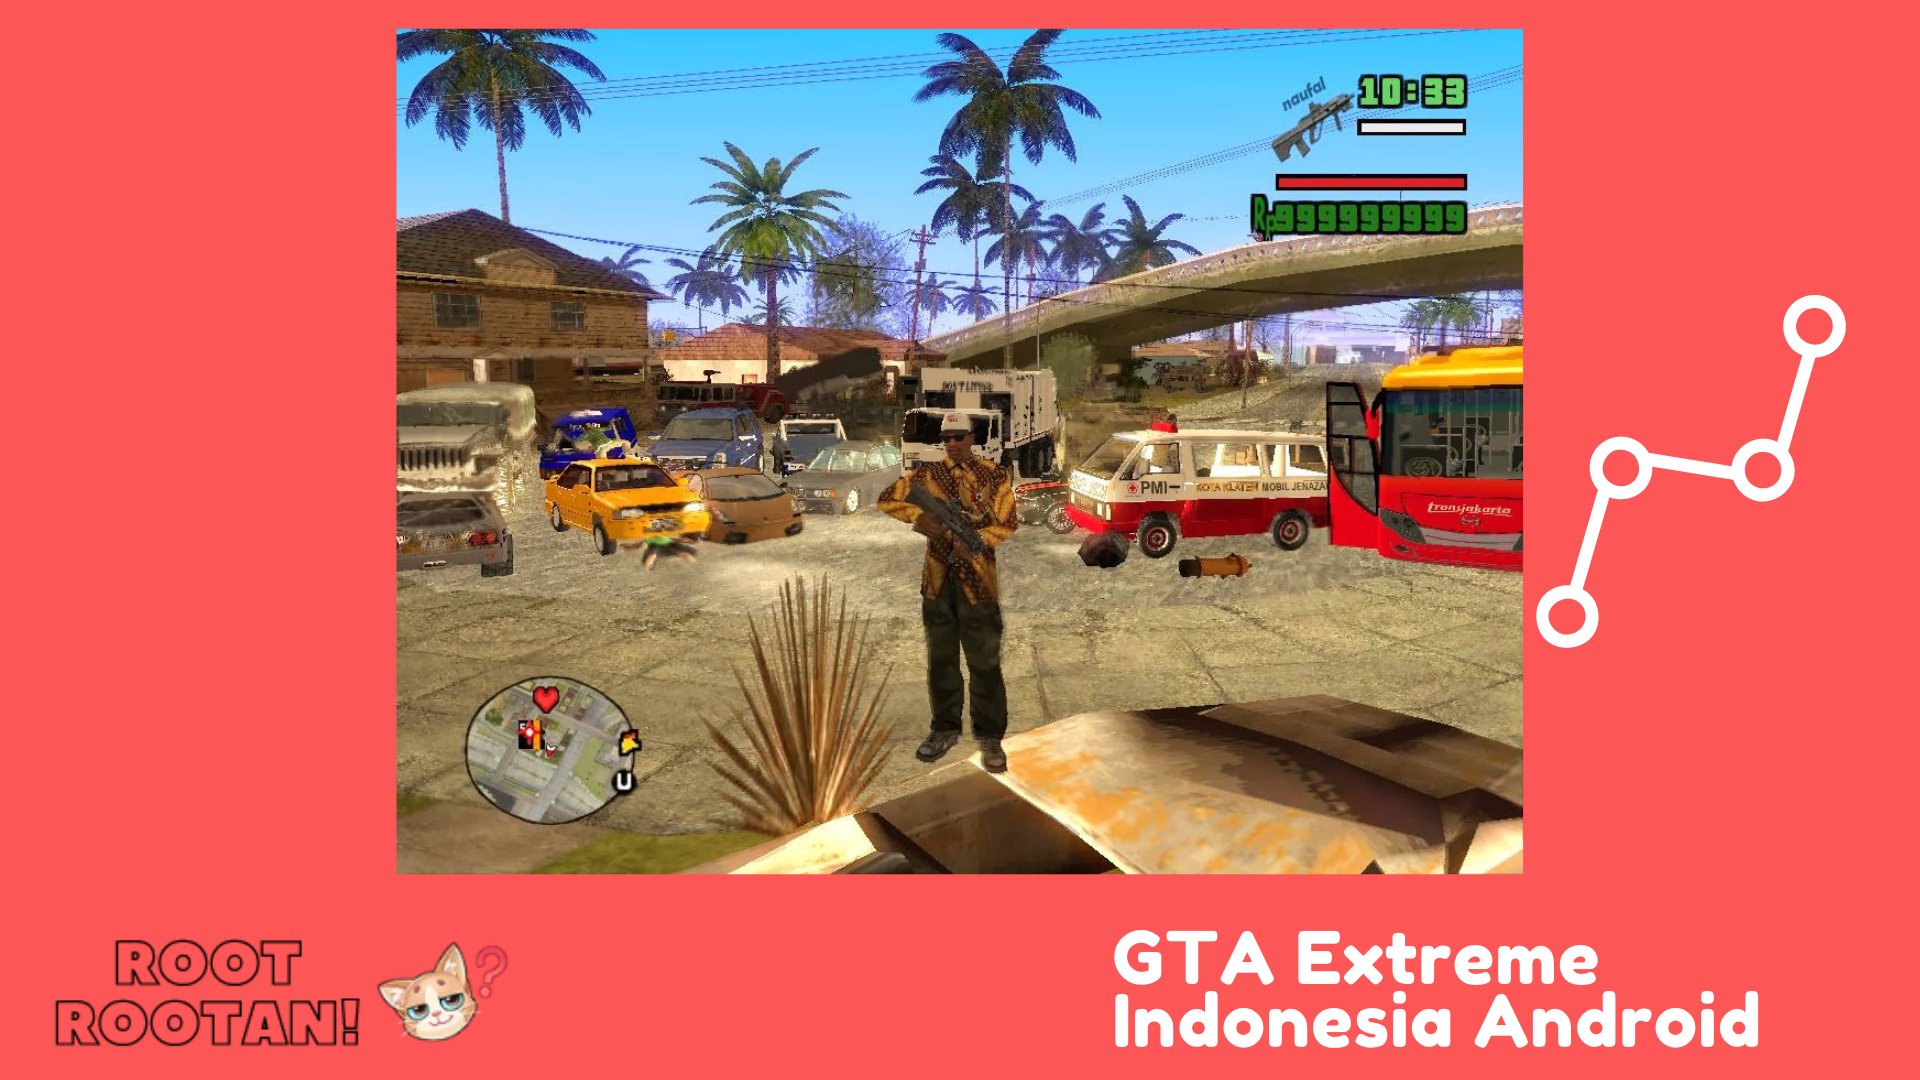 GTA Extreme Indonesia Android